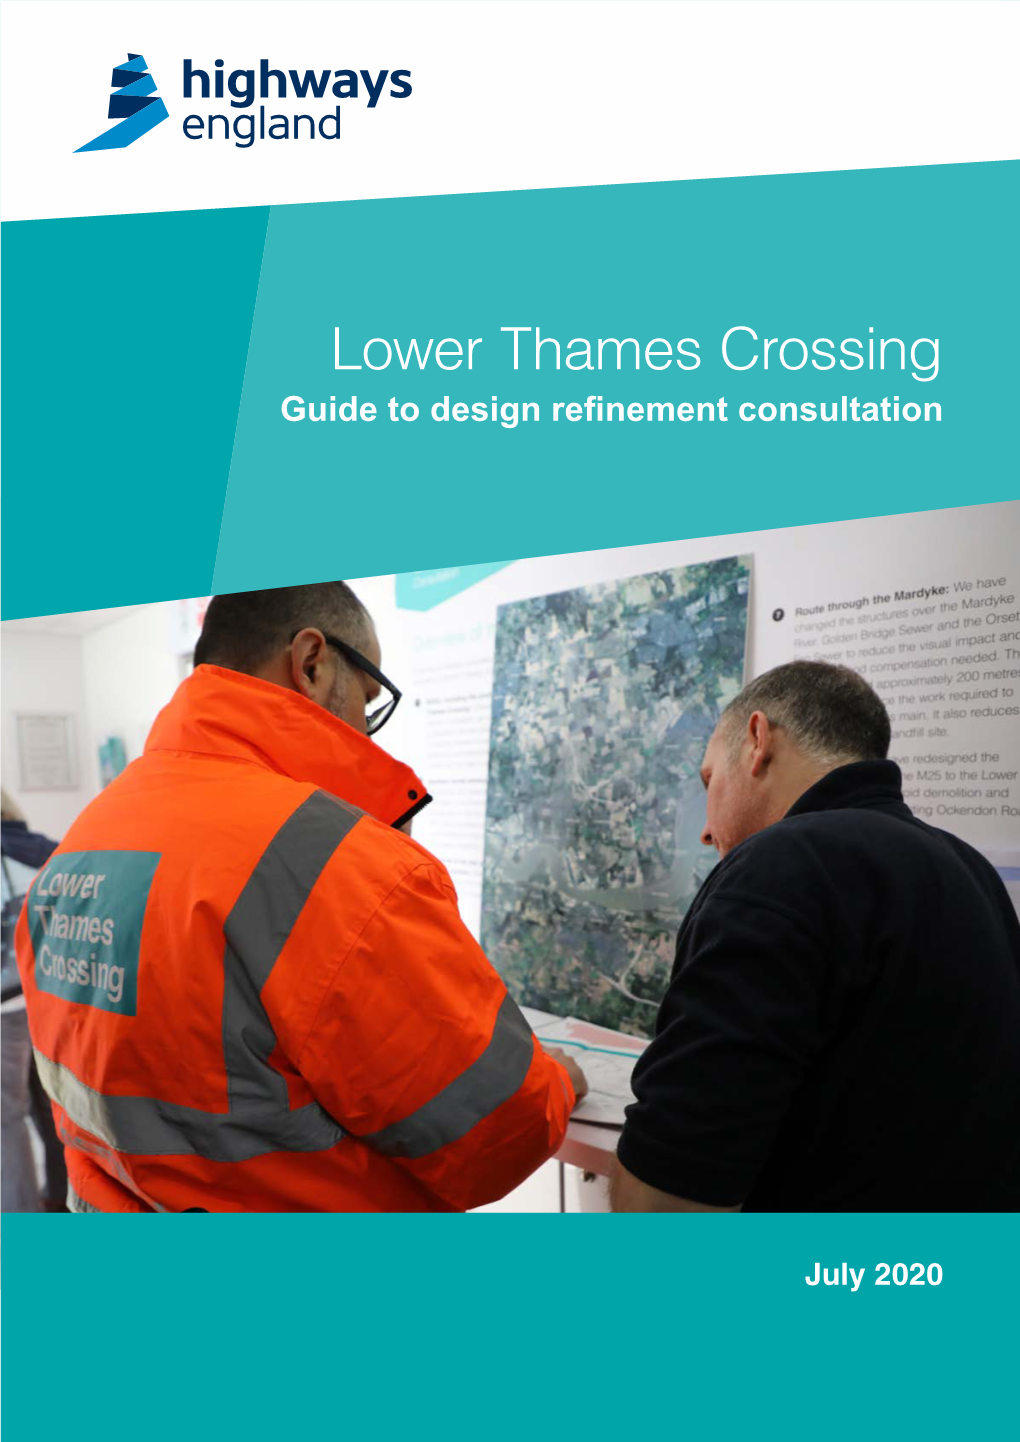 Lower Thames Crossing Guide to Design Refinement Consultation